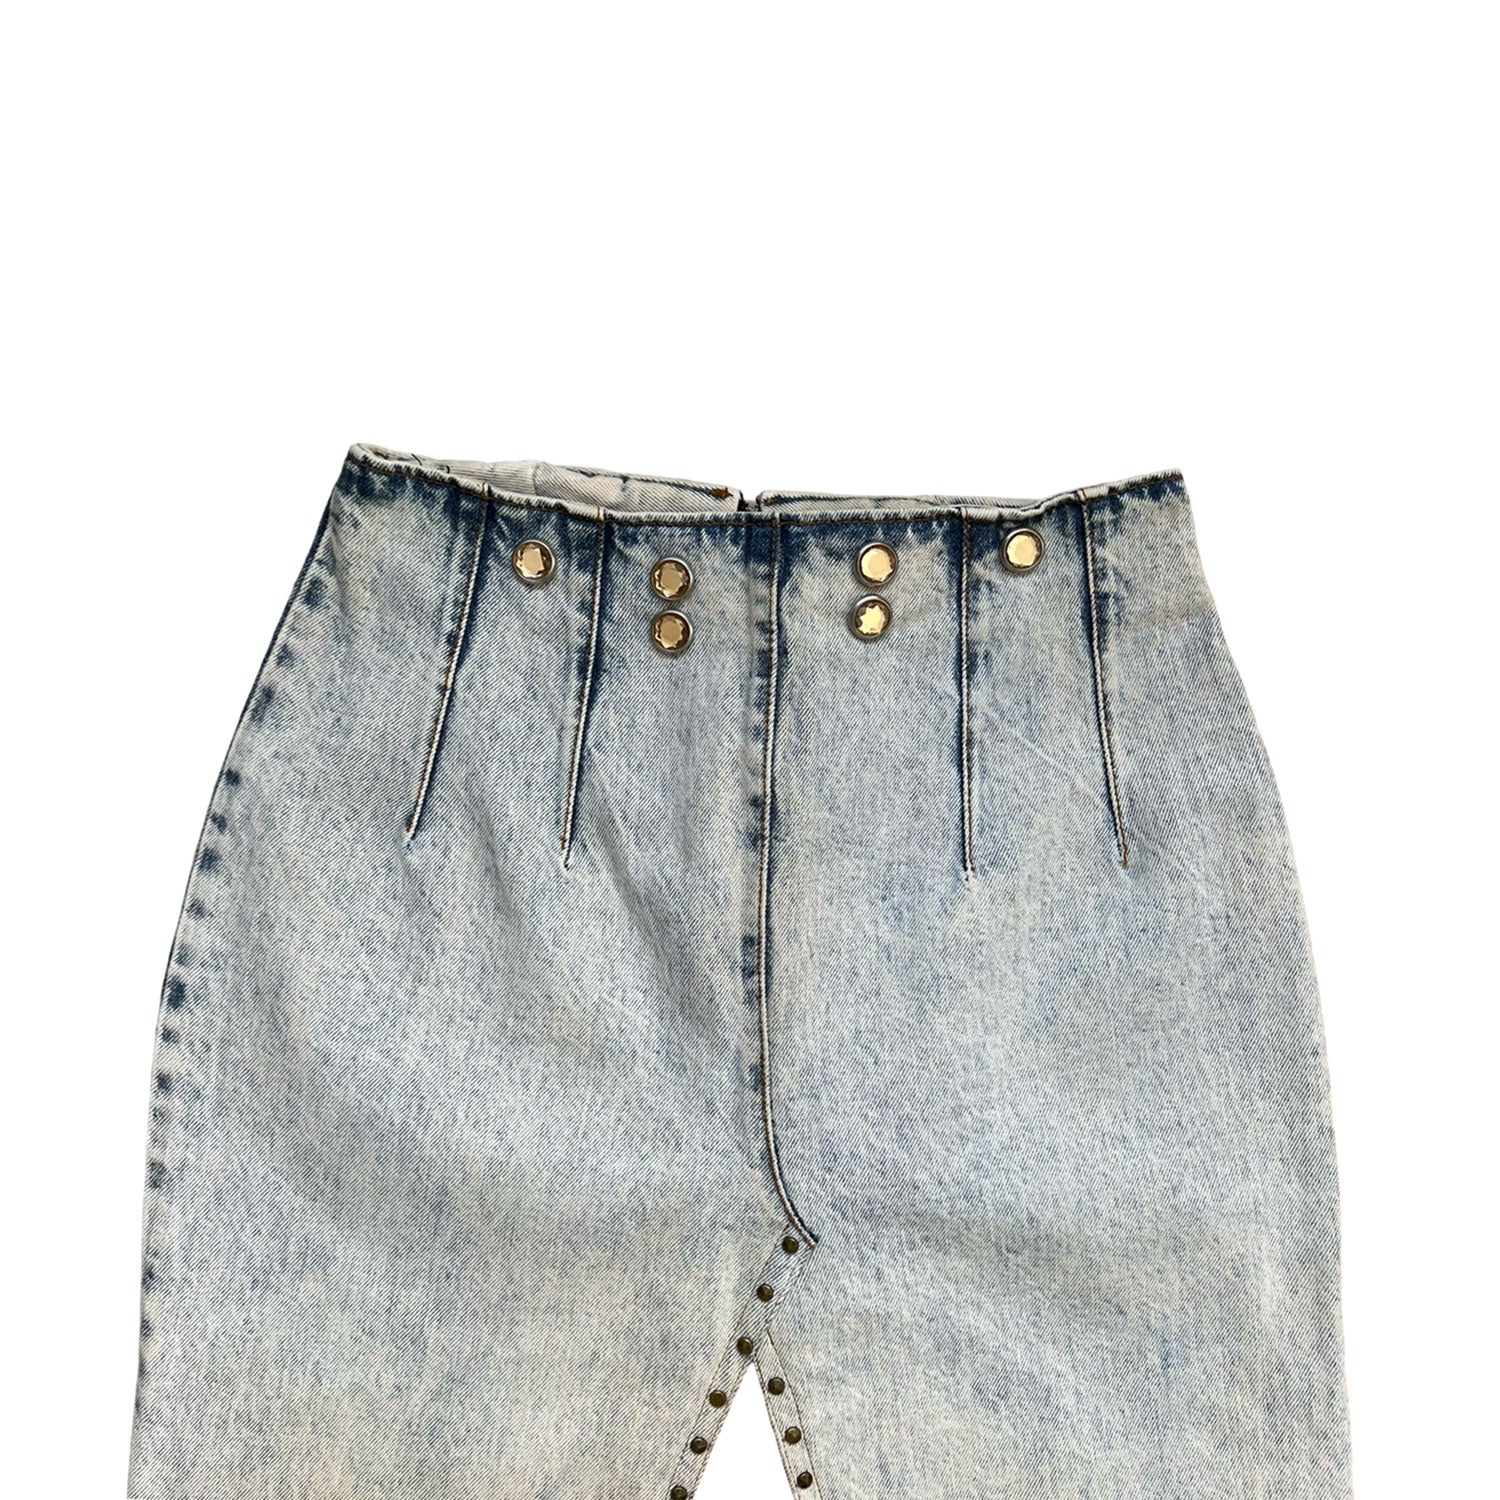 Denim Skirt In Acid-Washed Blue With Brown Panel